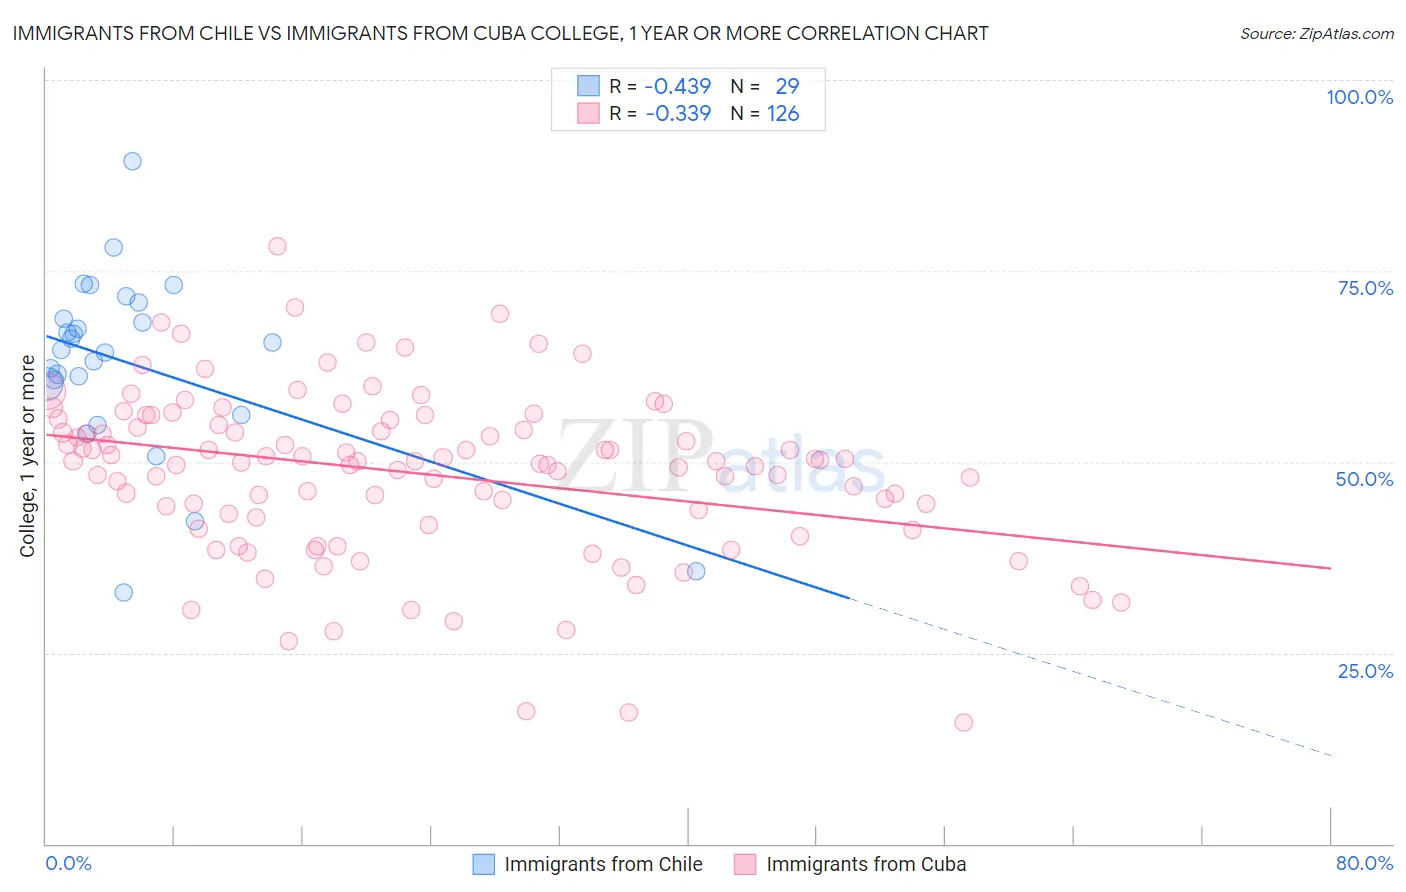 Immigrants from Chile vs Immigrants from Cuba College, 1 year or more